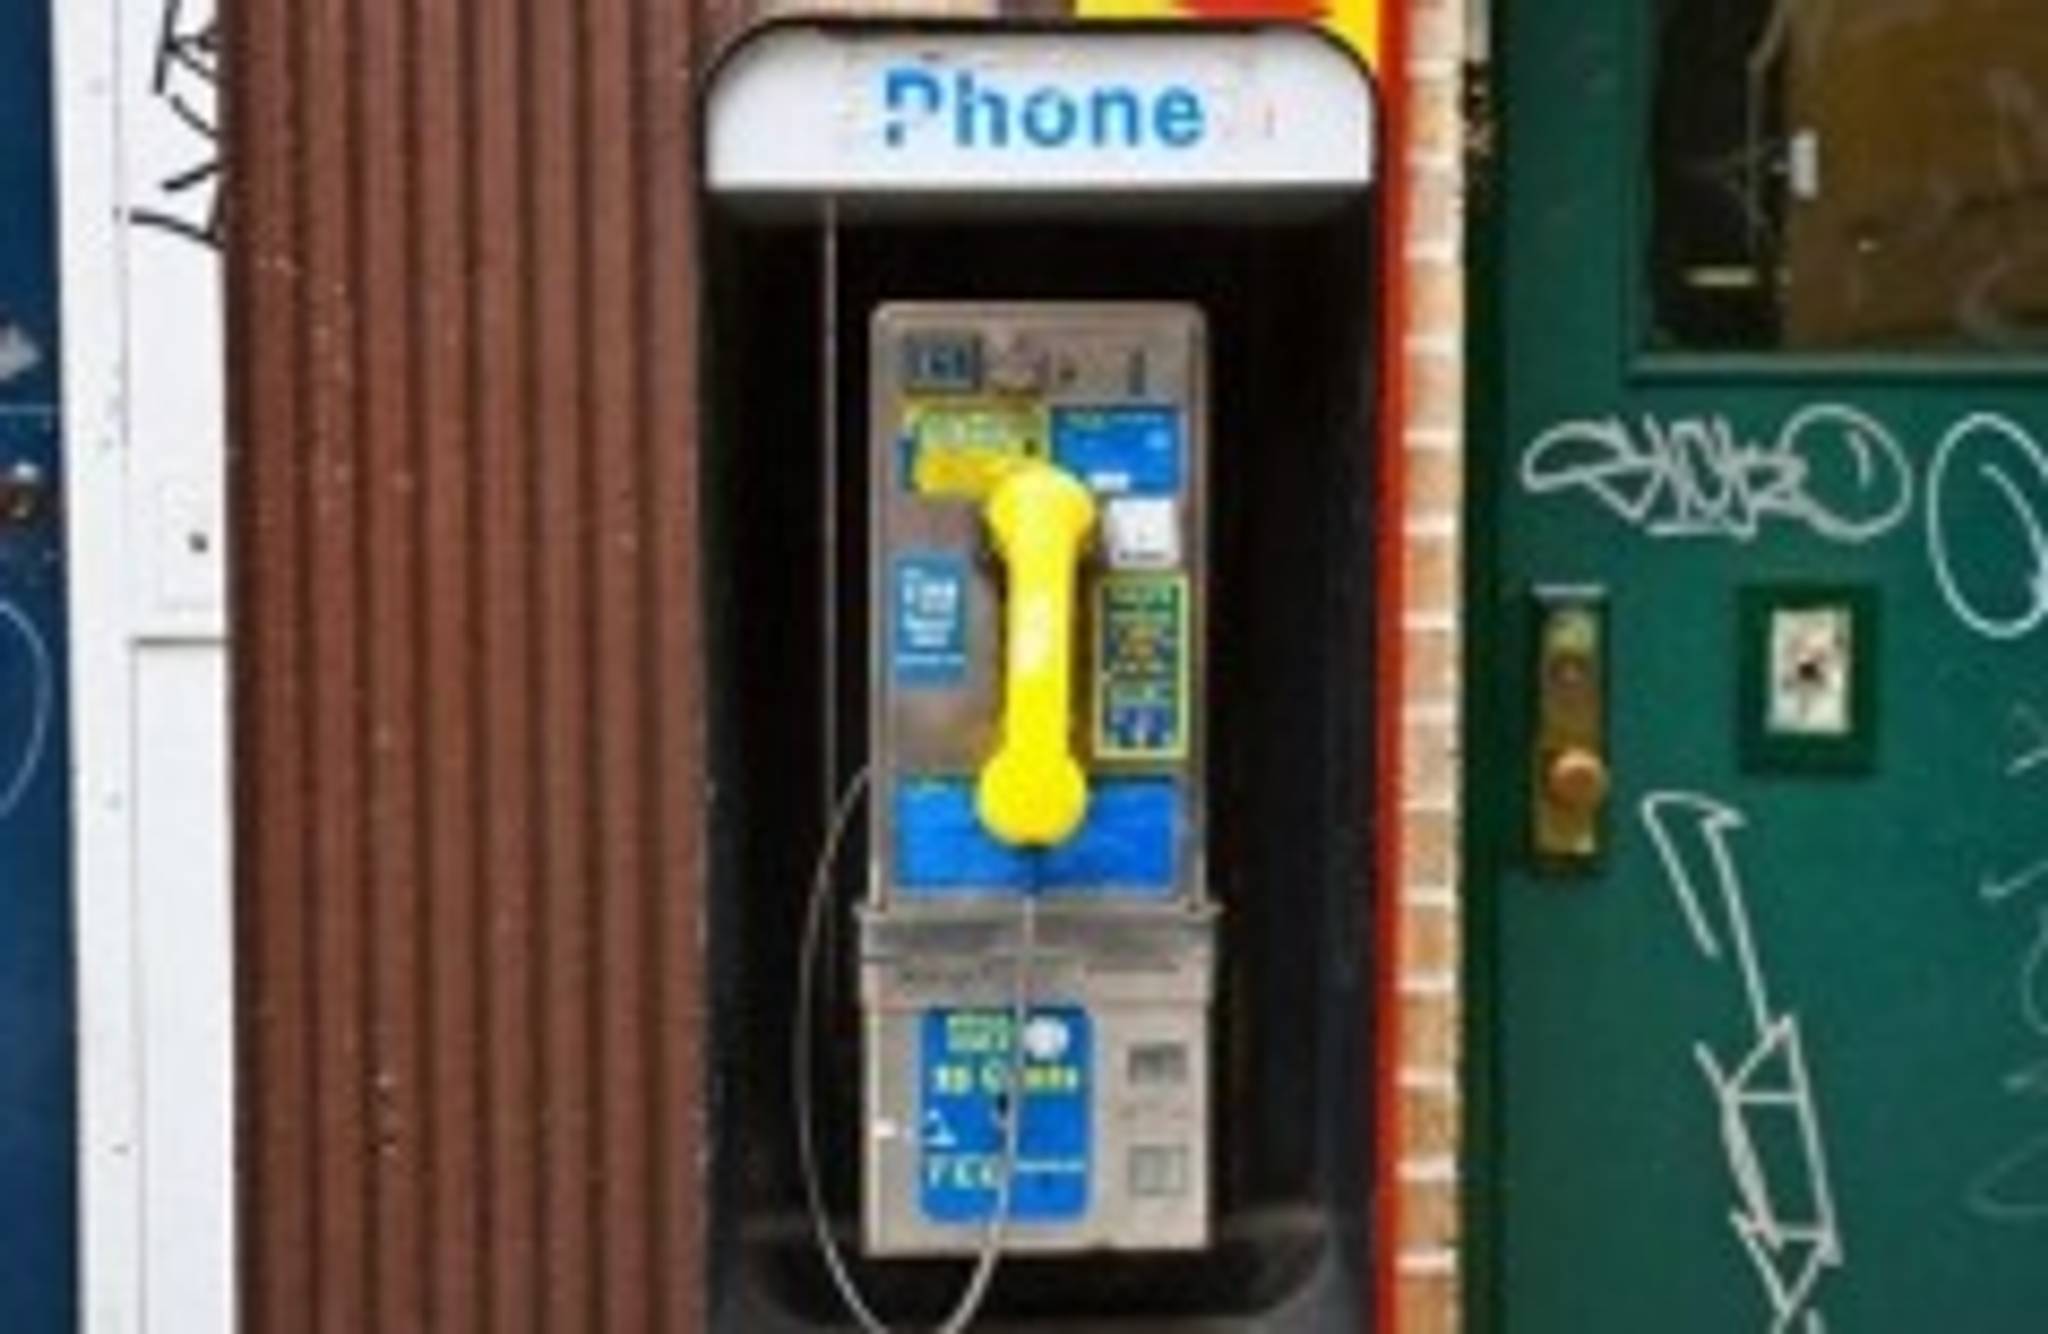 Reinventing the payphone